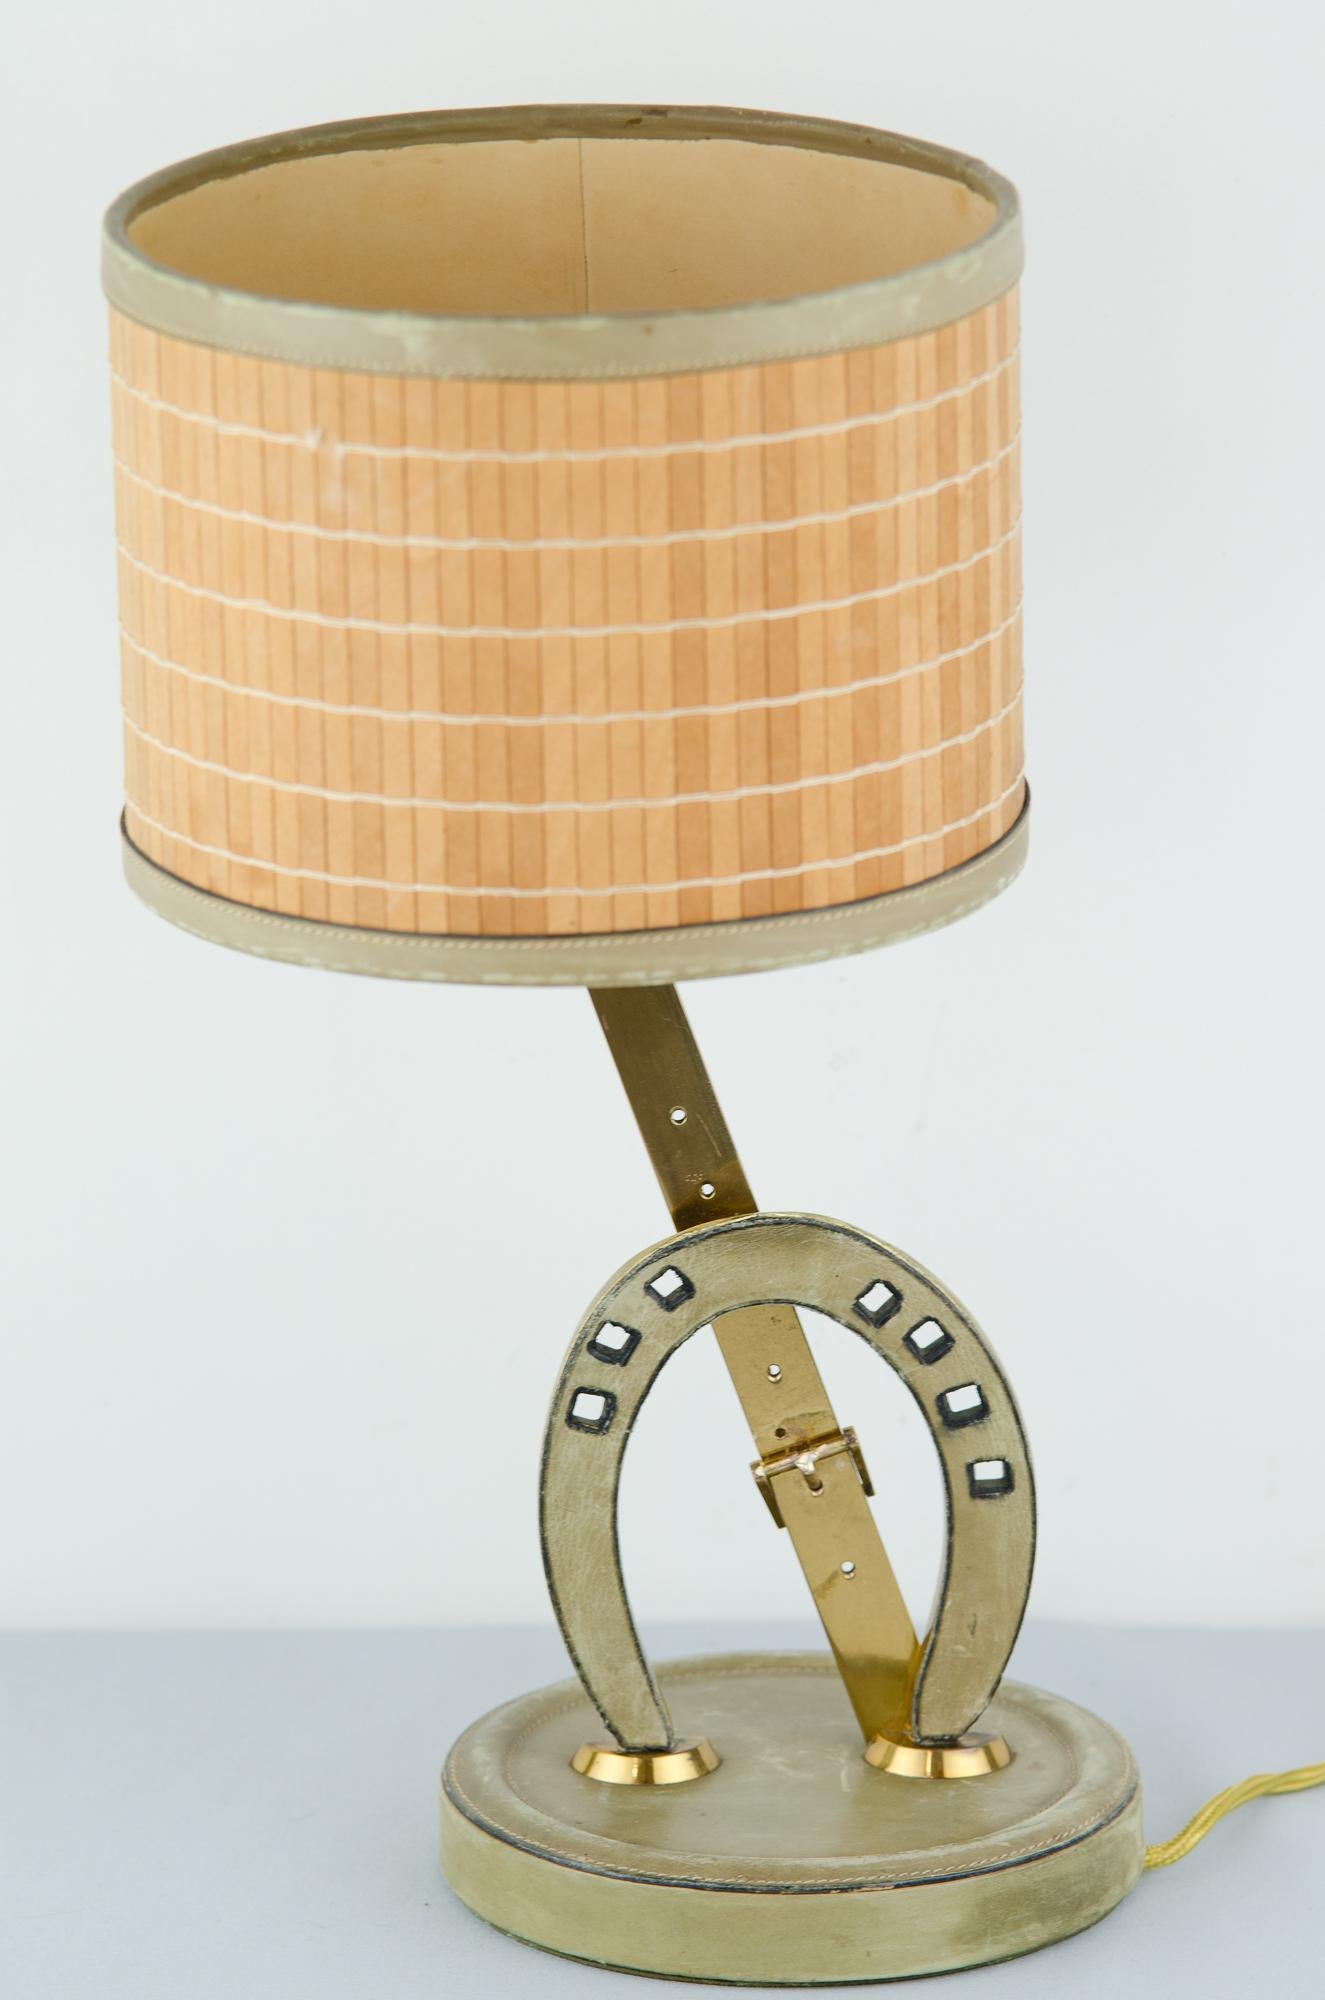 Table lamp, circa 1960s.
Brass and leather
Original shade
Original condition.